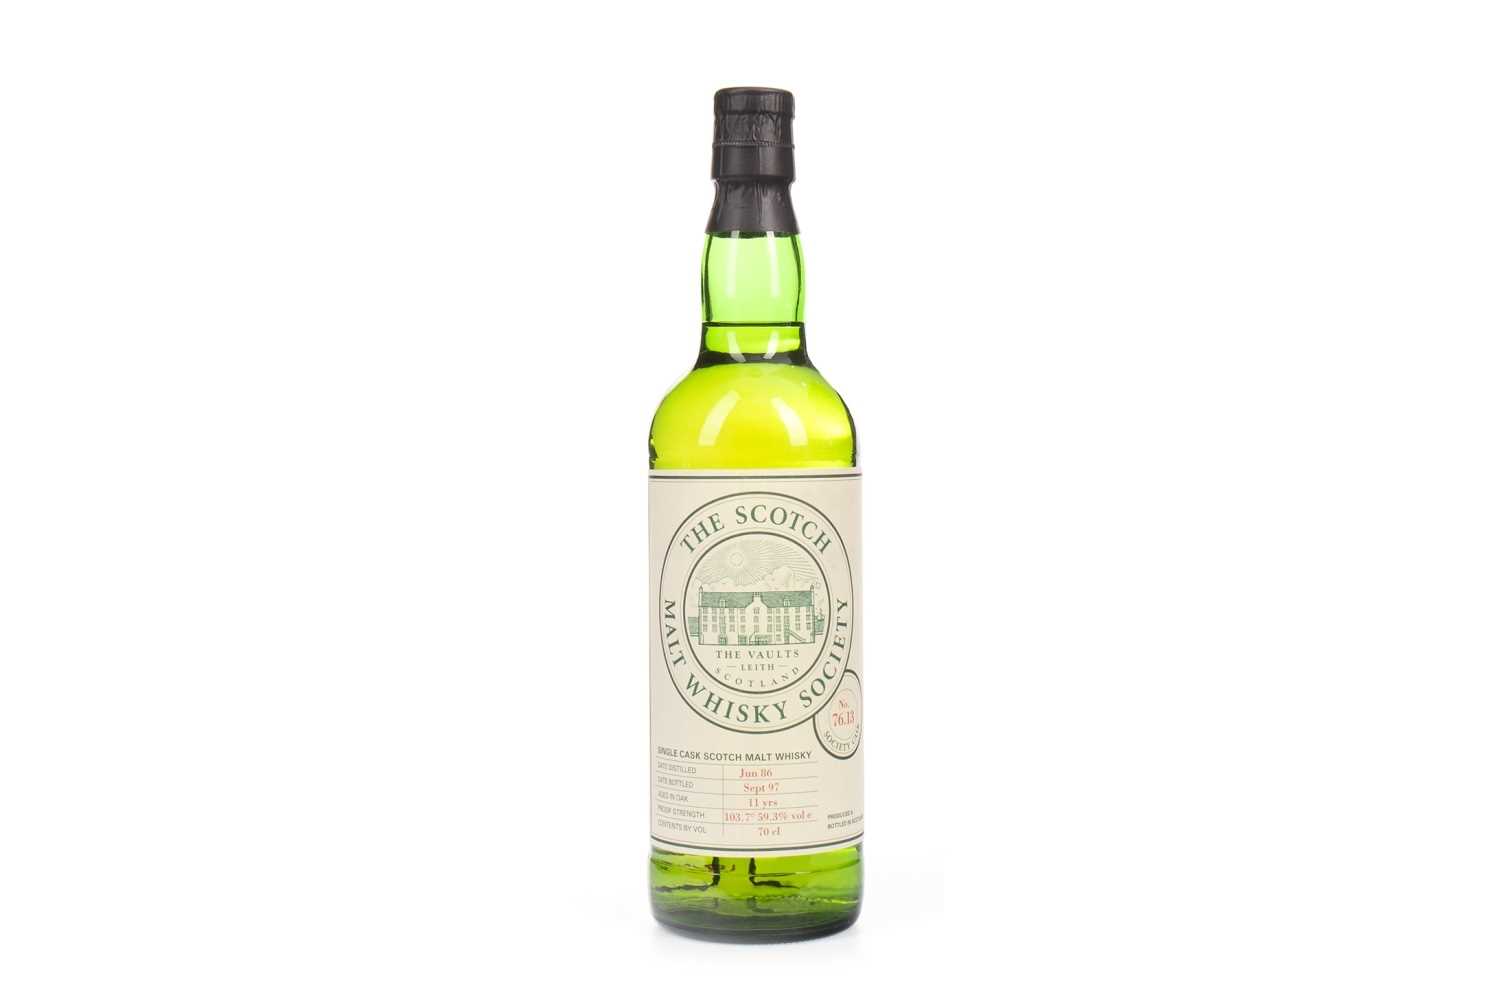 Lot 189 - MORTLACH 1986 SMWS 76.13 AGED 11 YEARS